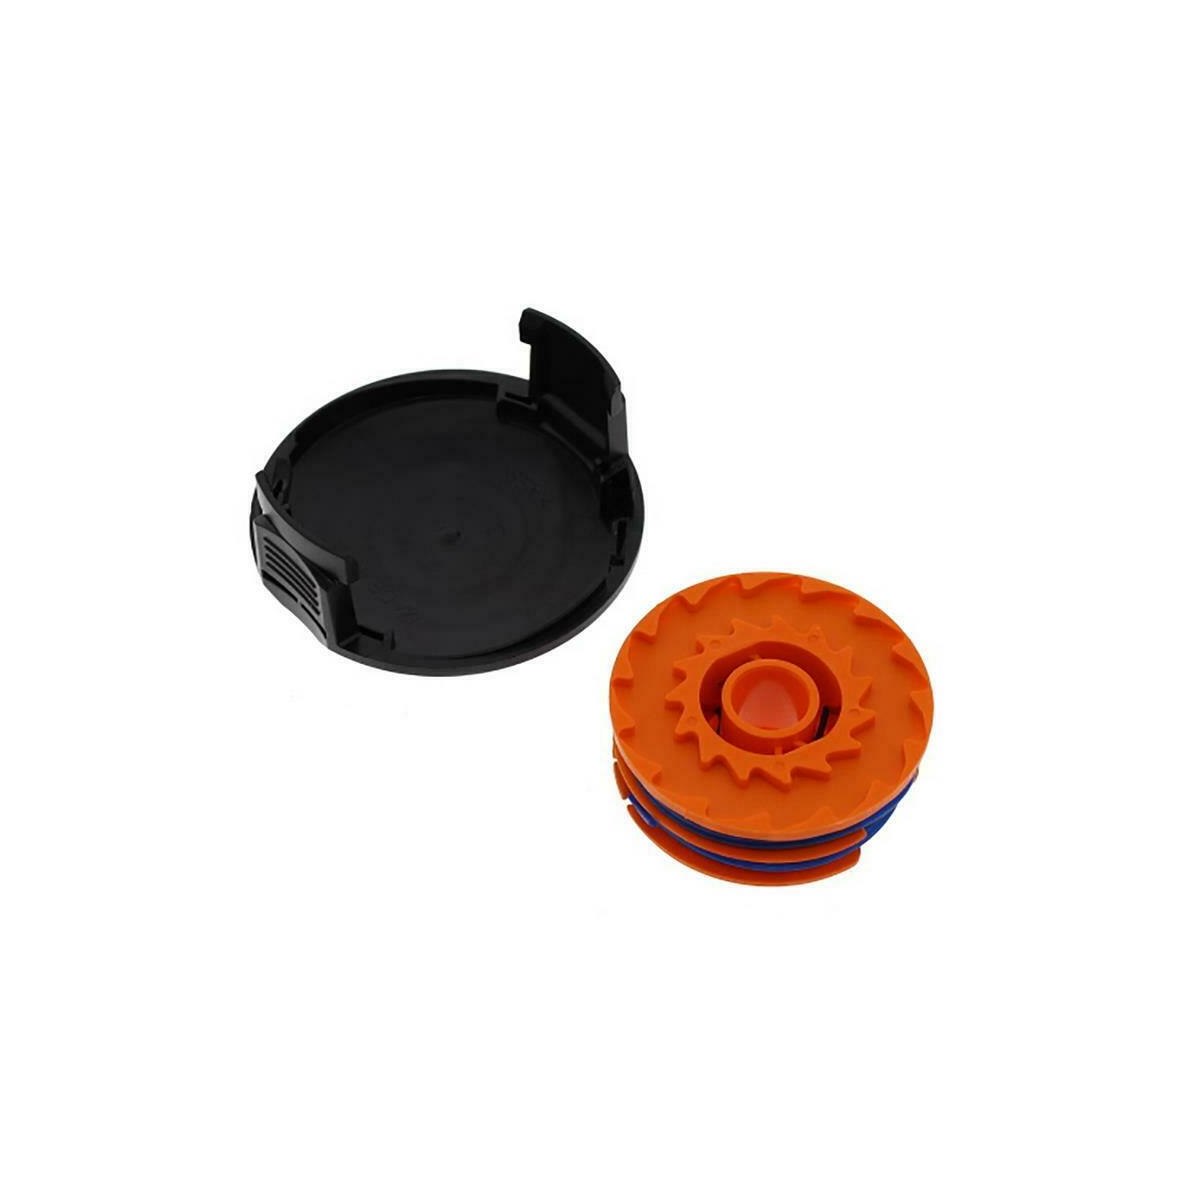 Replacement Spool LIne and Cover for McGregor Strimmers